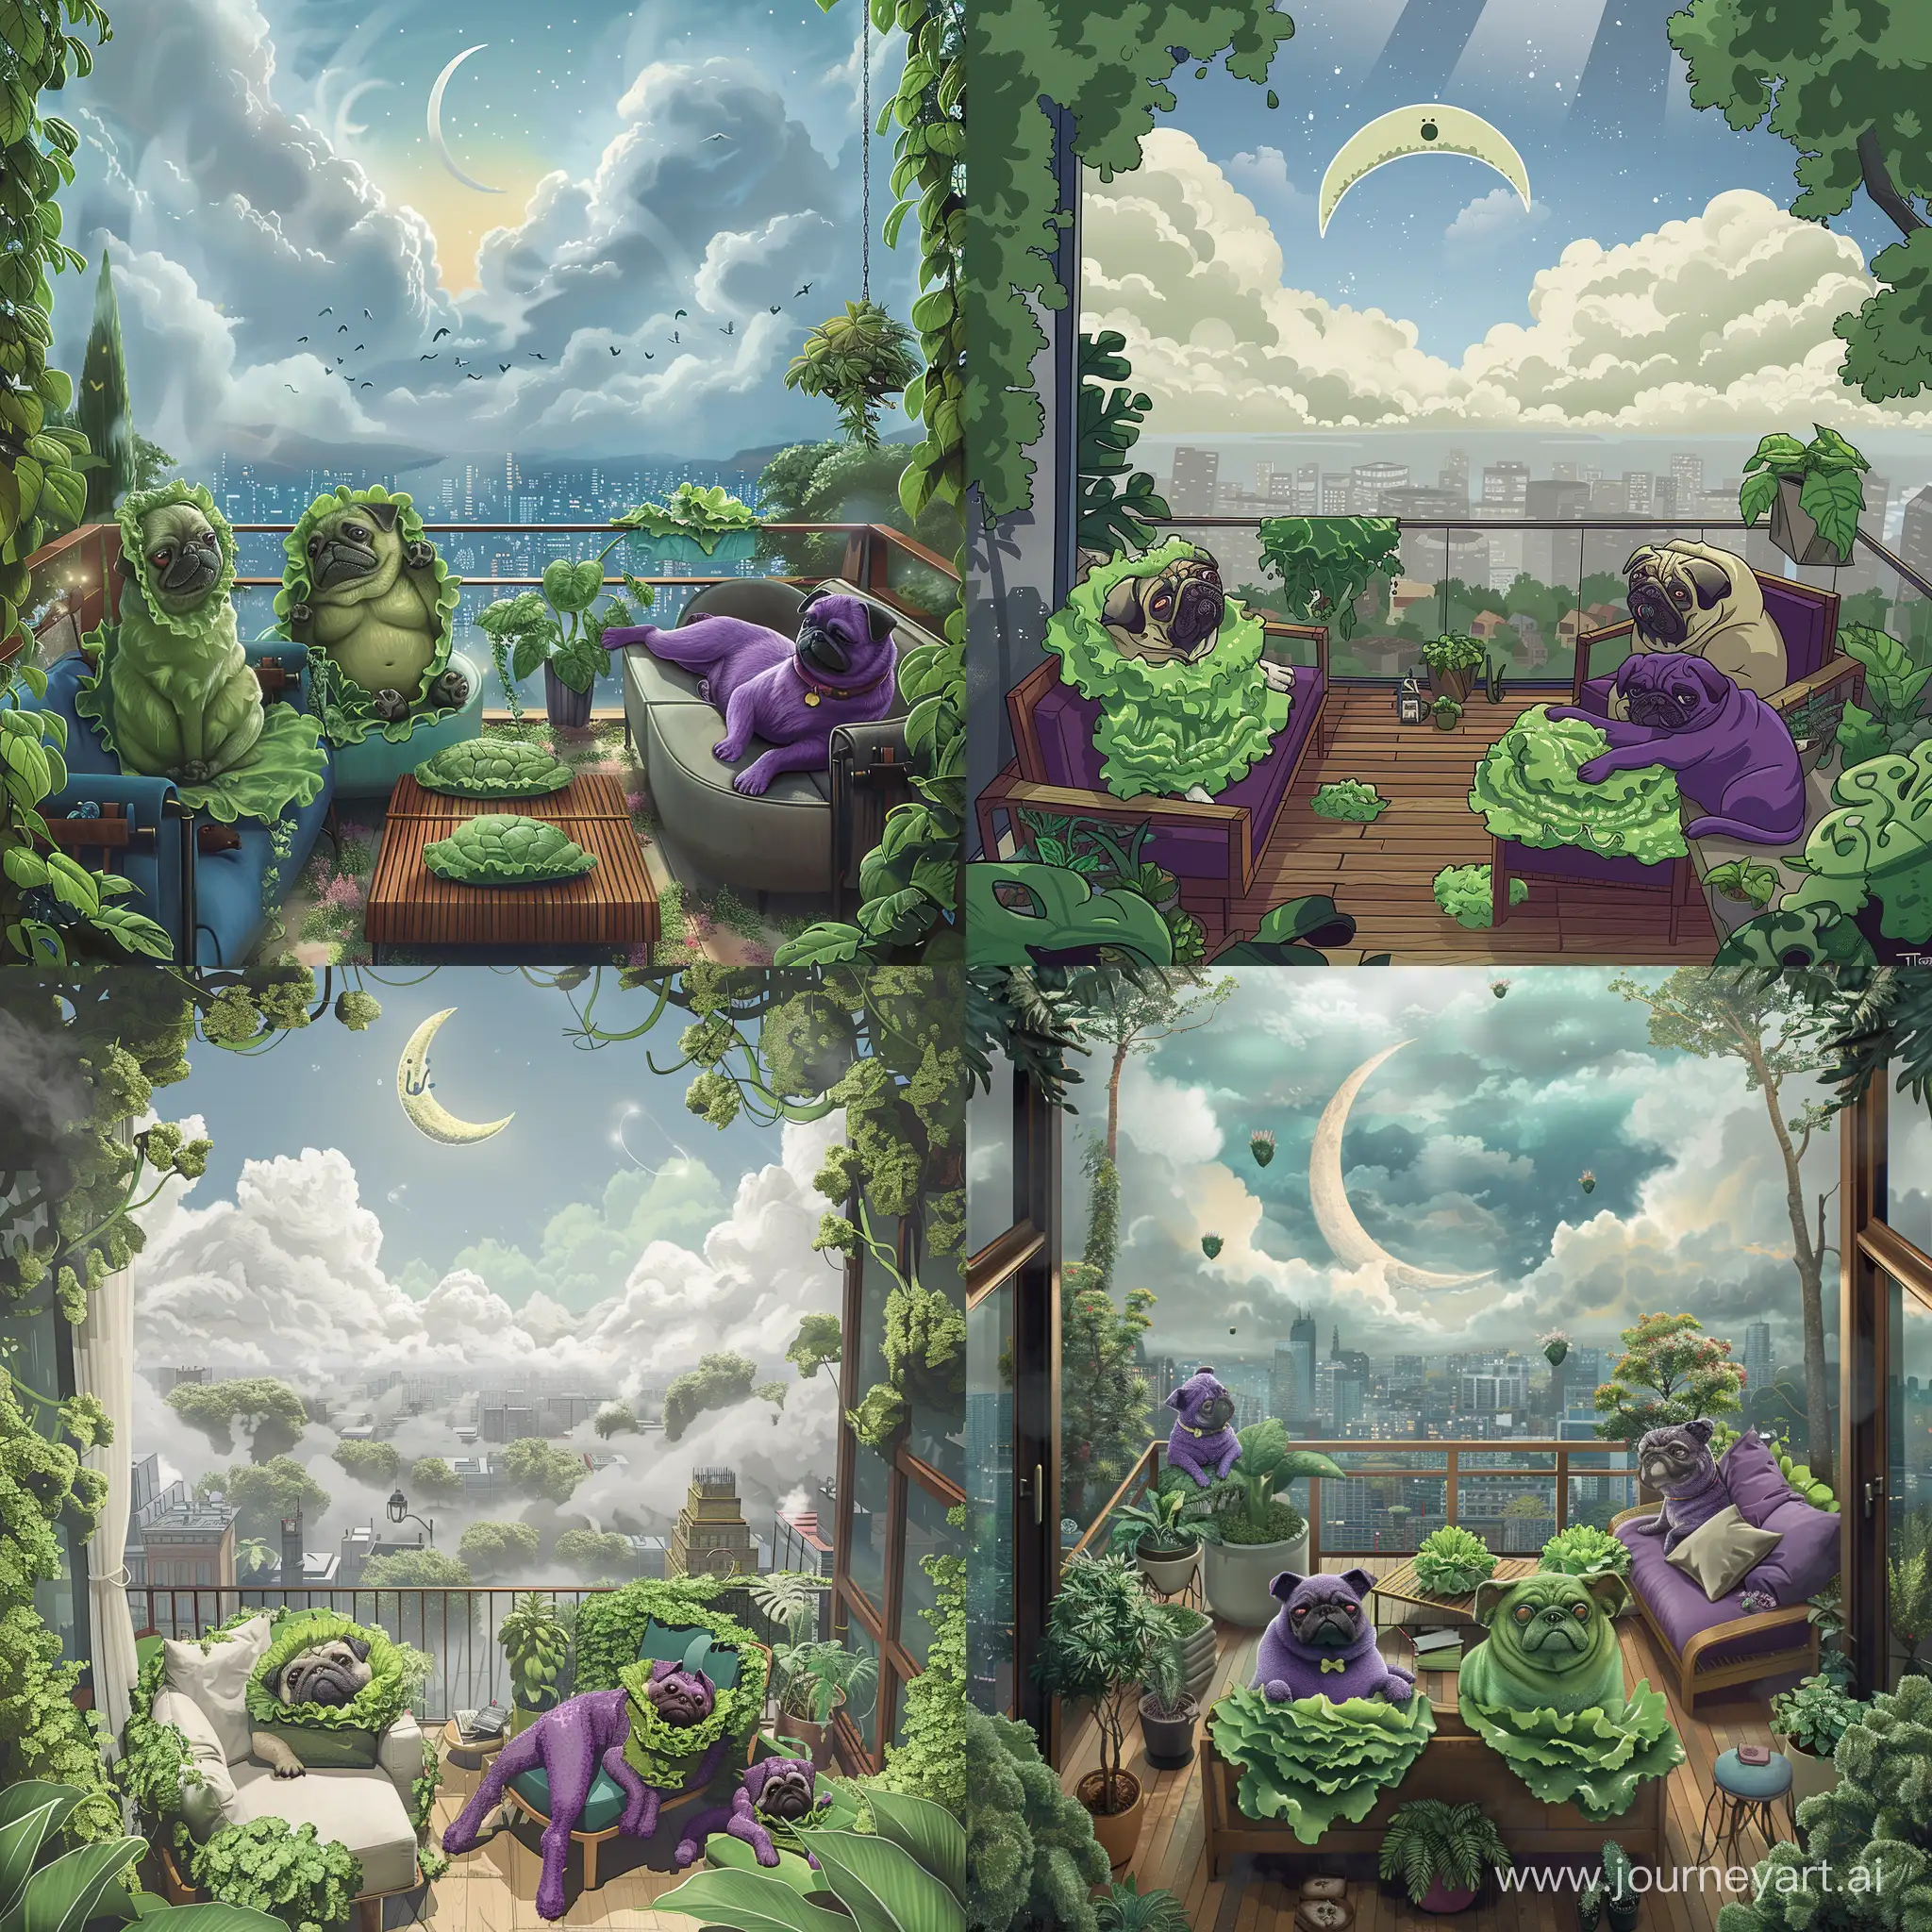 Grumpy-Lettuce-Pug-Dogs-and-Purple-Brussels-Griffon-Dogs-on-Balcony-Overlooking-Misty-City-with-Crescent-Moon